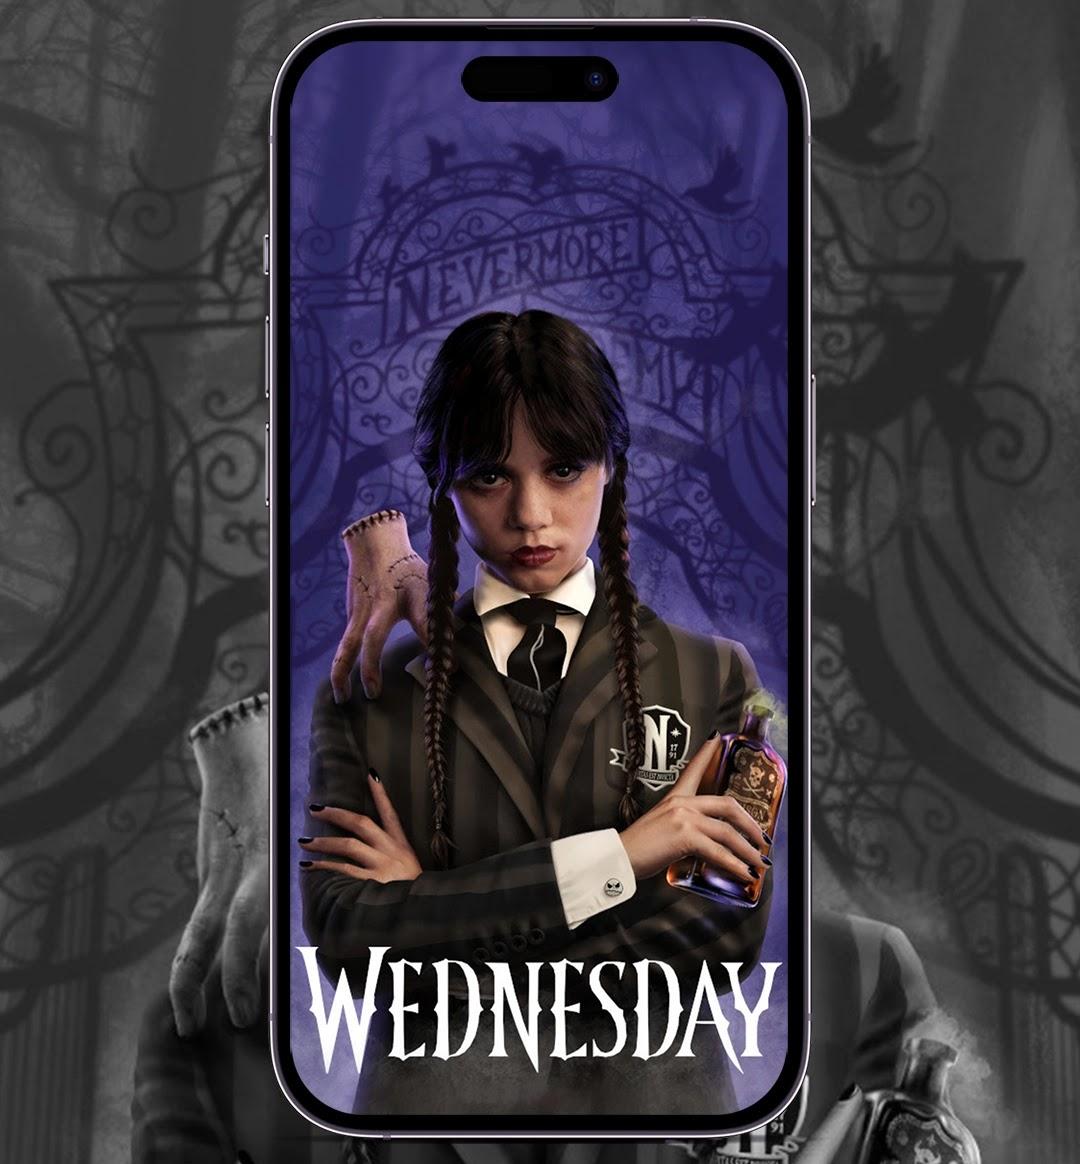 15 Wednesday Addams Wallpaper Ideas  Collage for iPhone  Idea Wallpapers   iPhone WallpapersColor Schemes